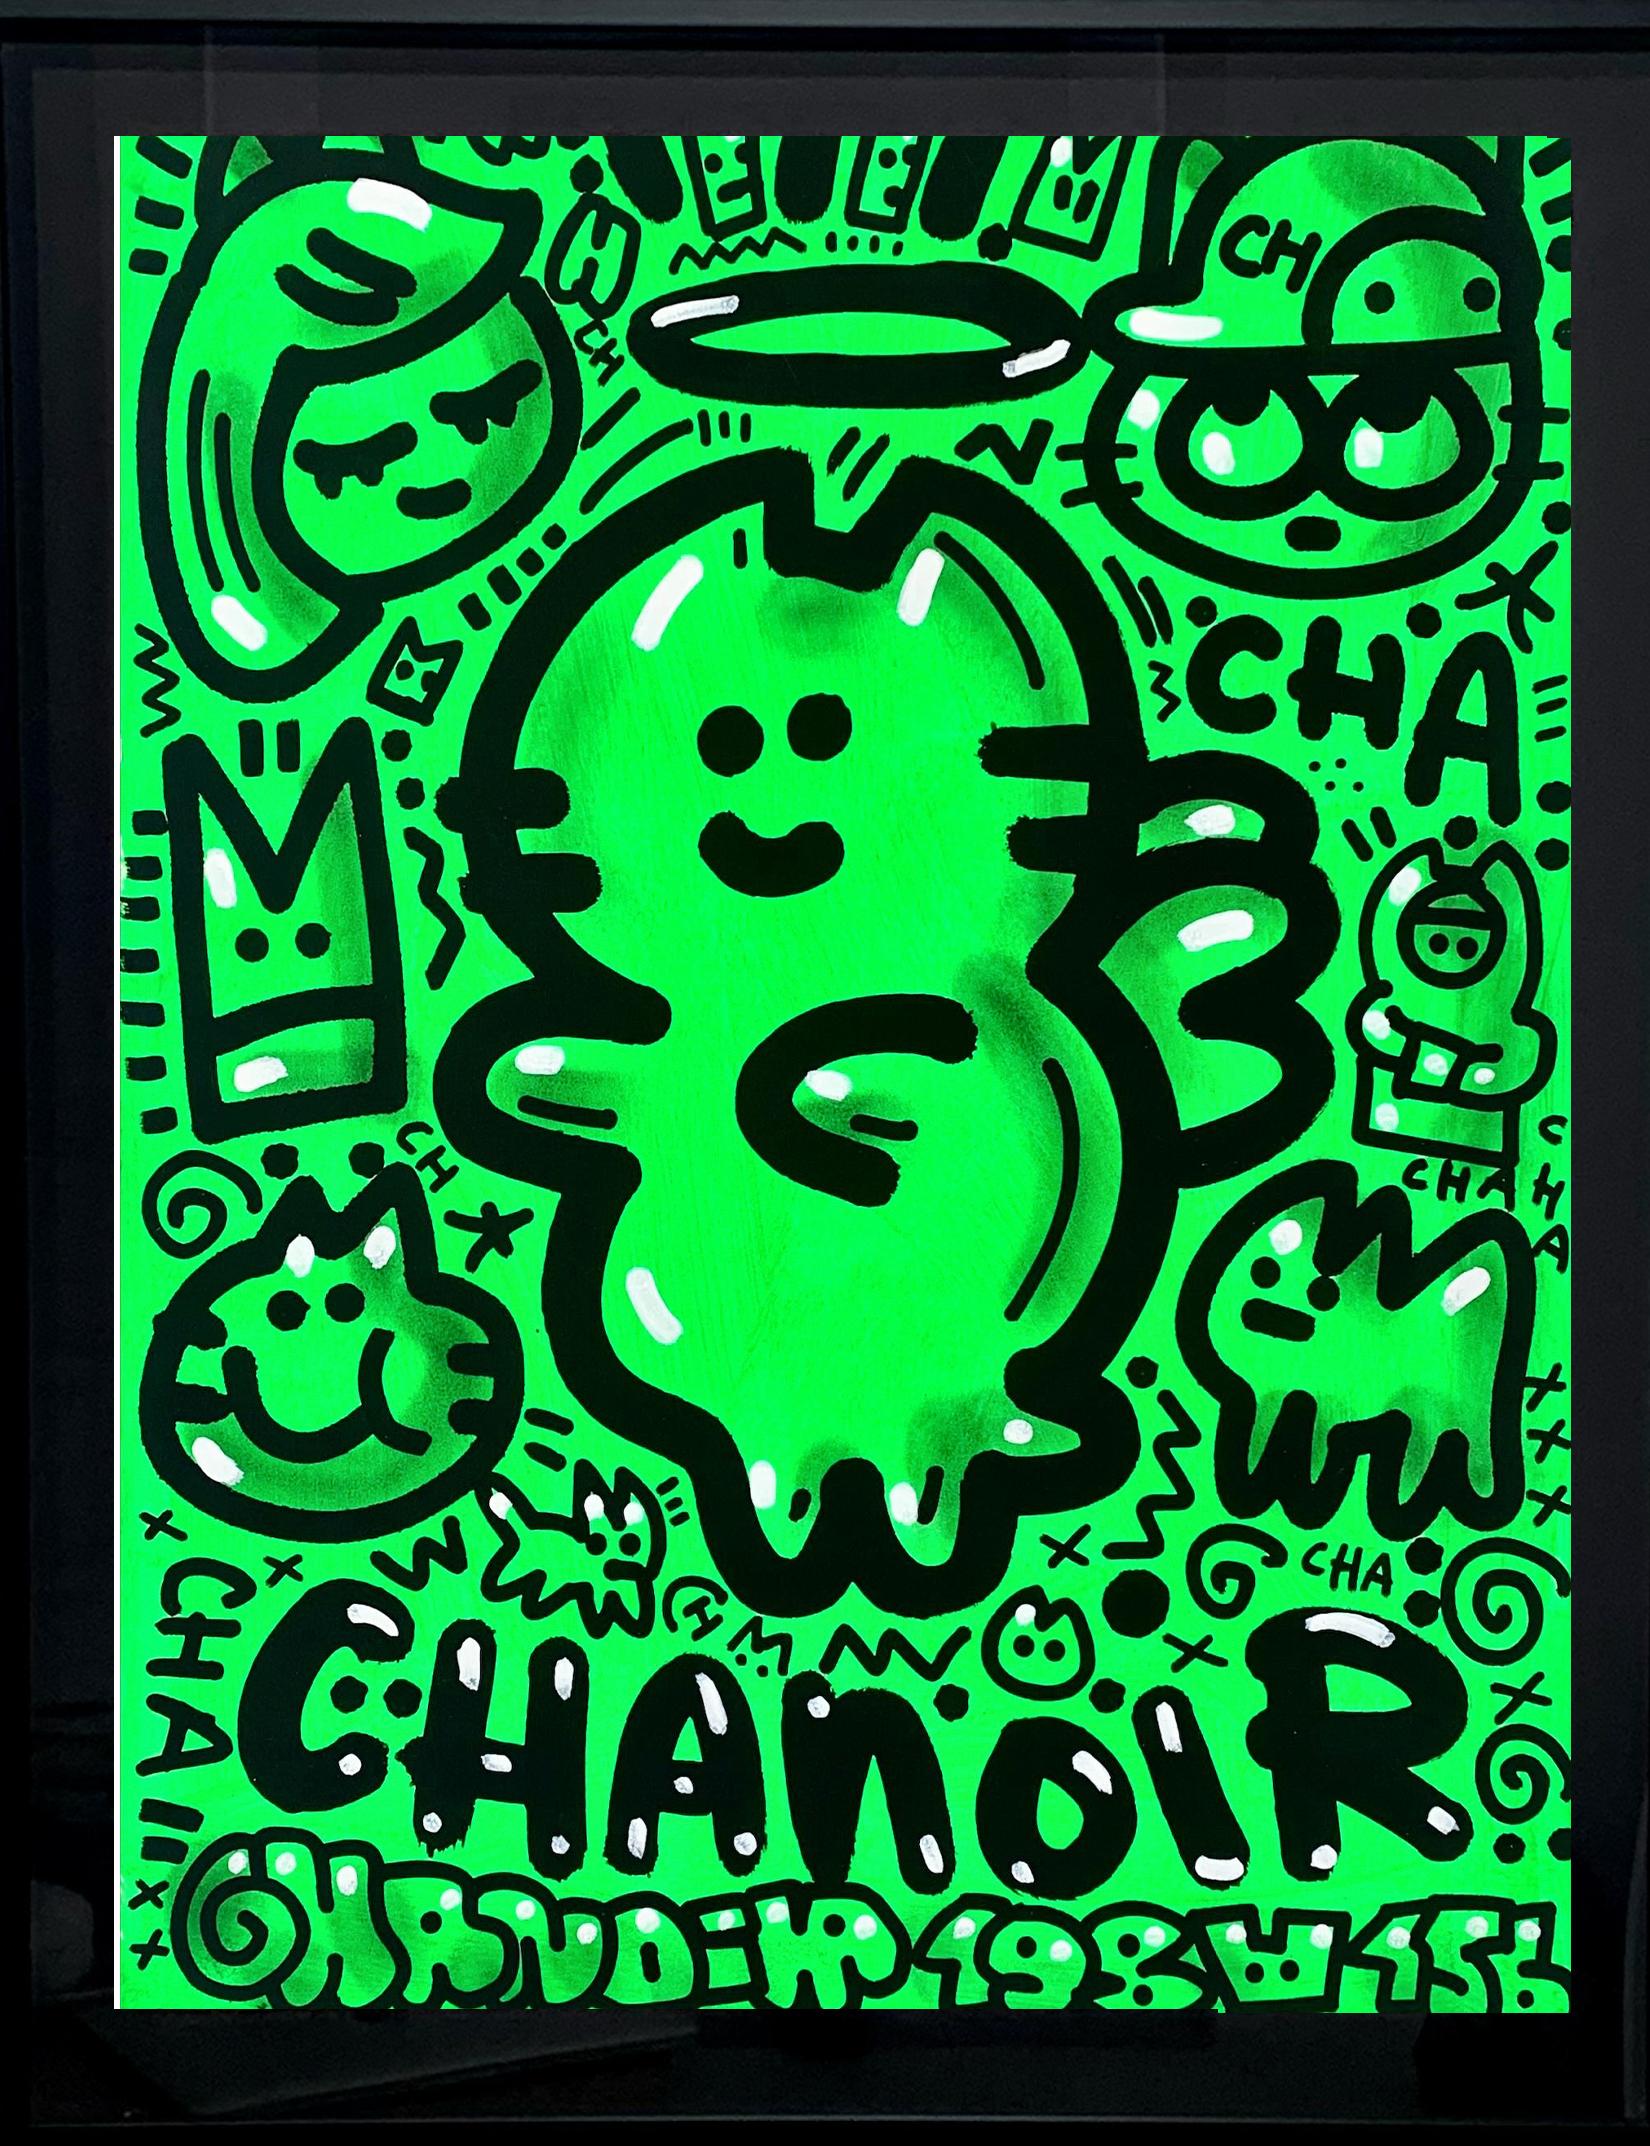 GREEN LOVE by CHANOIR, French Urban Artist, Acrylic and Spray on Paper - Painting by Chanoir